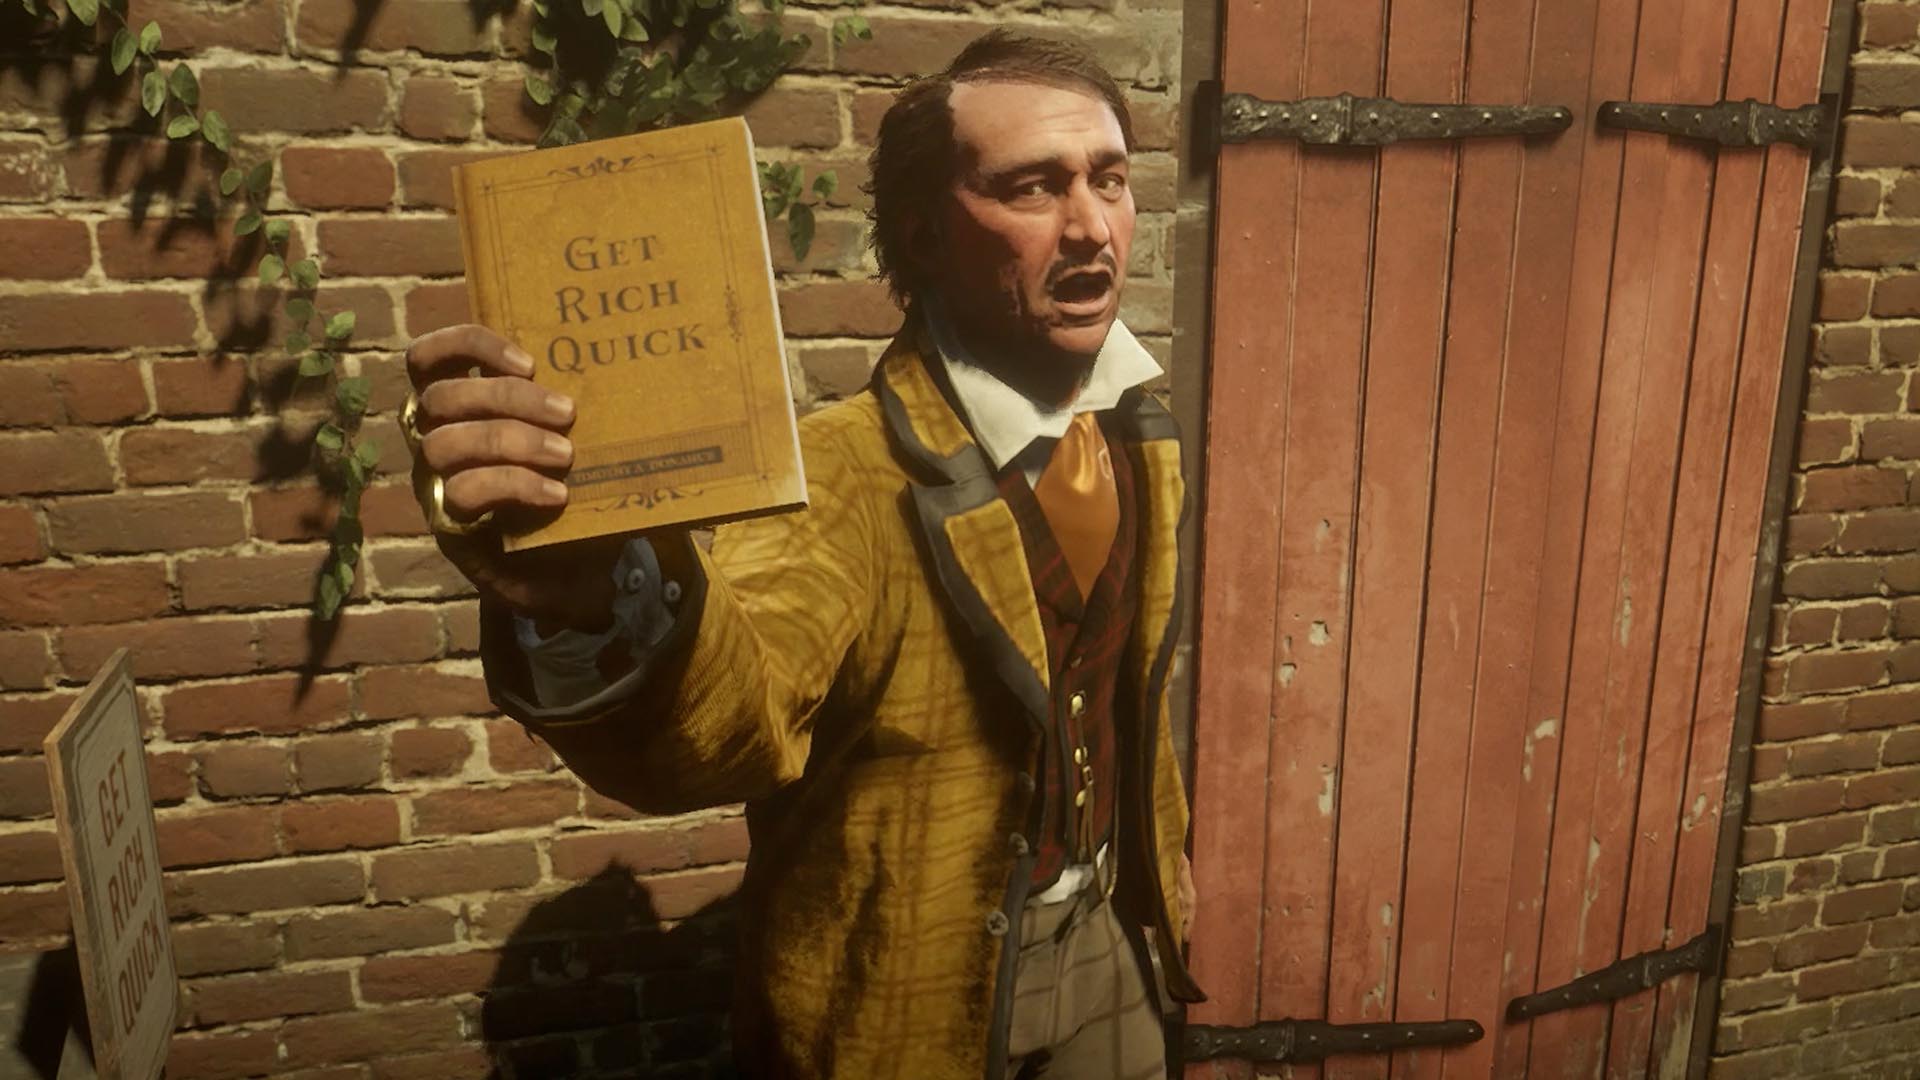 Red Dead Redemption 2&nbsp;guide to the Get Rich Quick book by Timothy Donahue